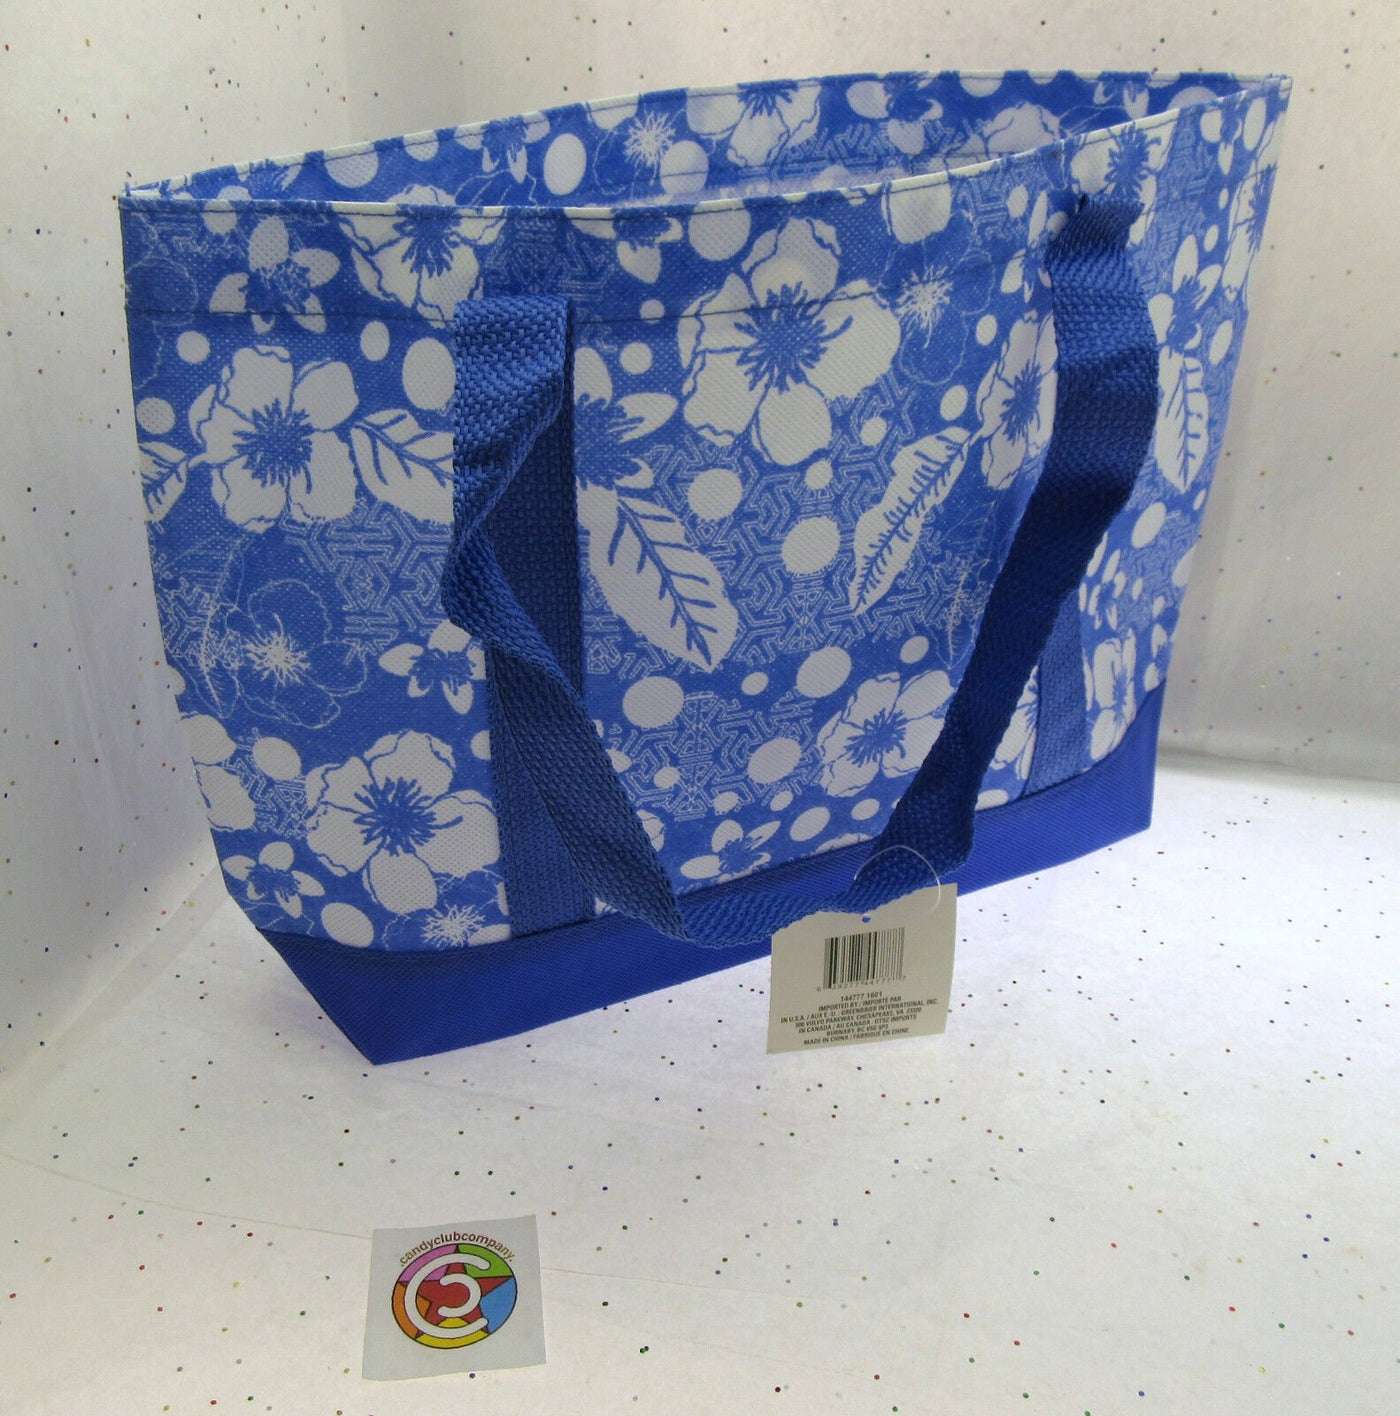 Floral Tote Bag ~ Reusable Eco Bags Grocery Beach ~ Blue